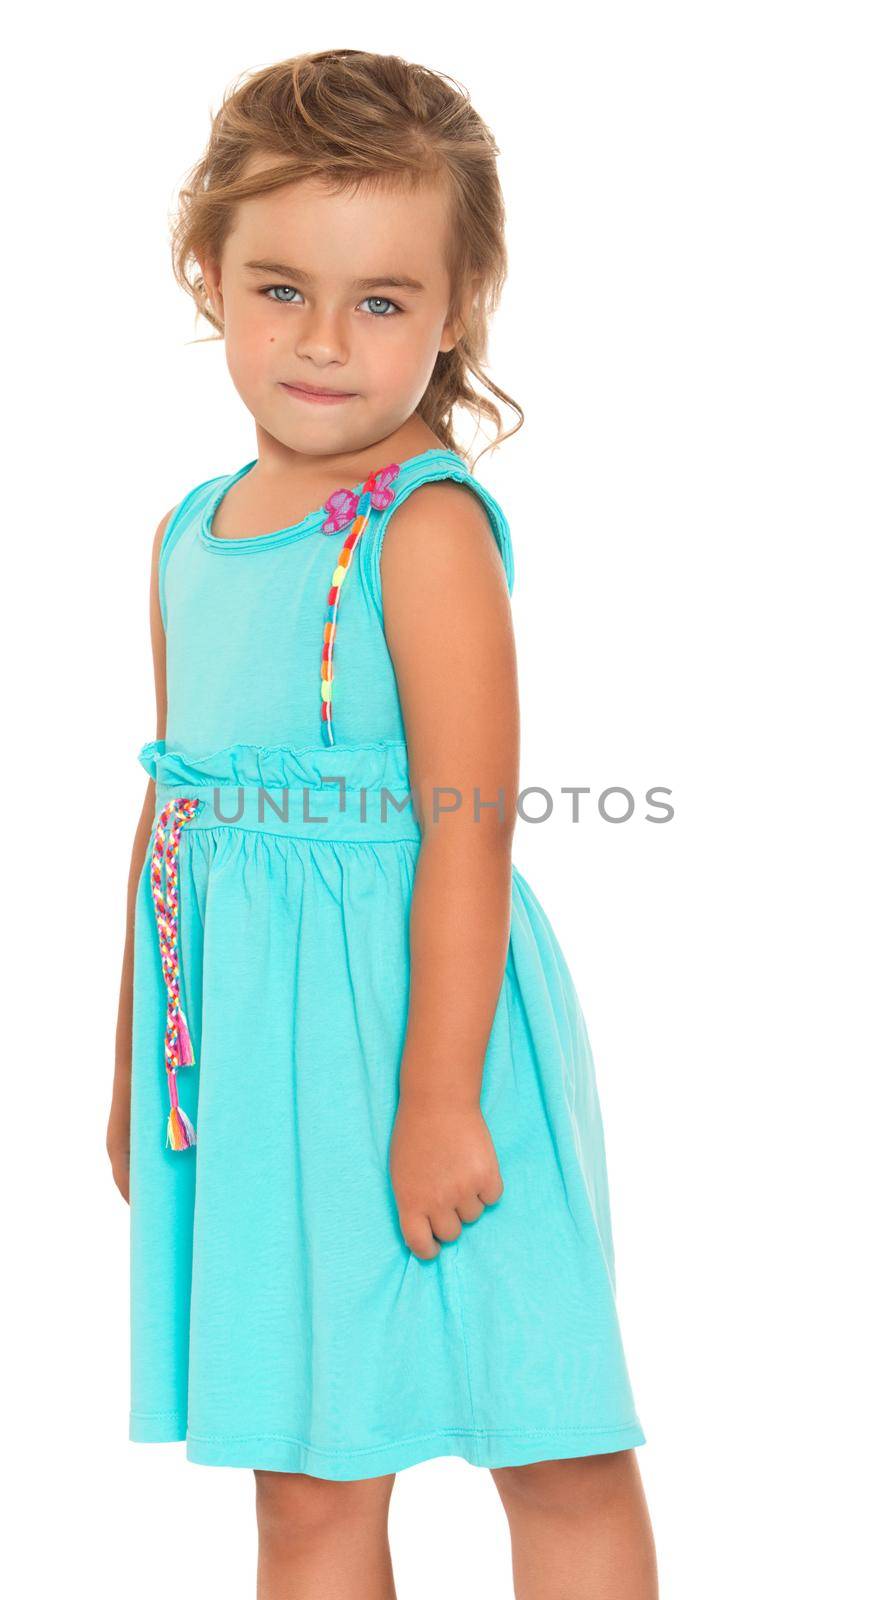 Cute little girl with beautiful grey eyes . In the summer blue dress. Takes a step forward. Close-up - Isolated on white background